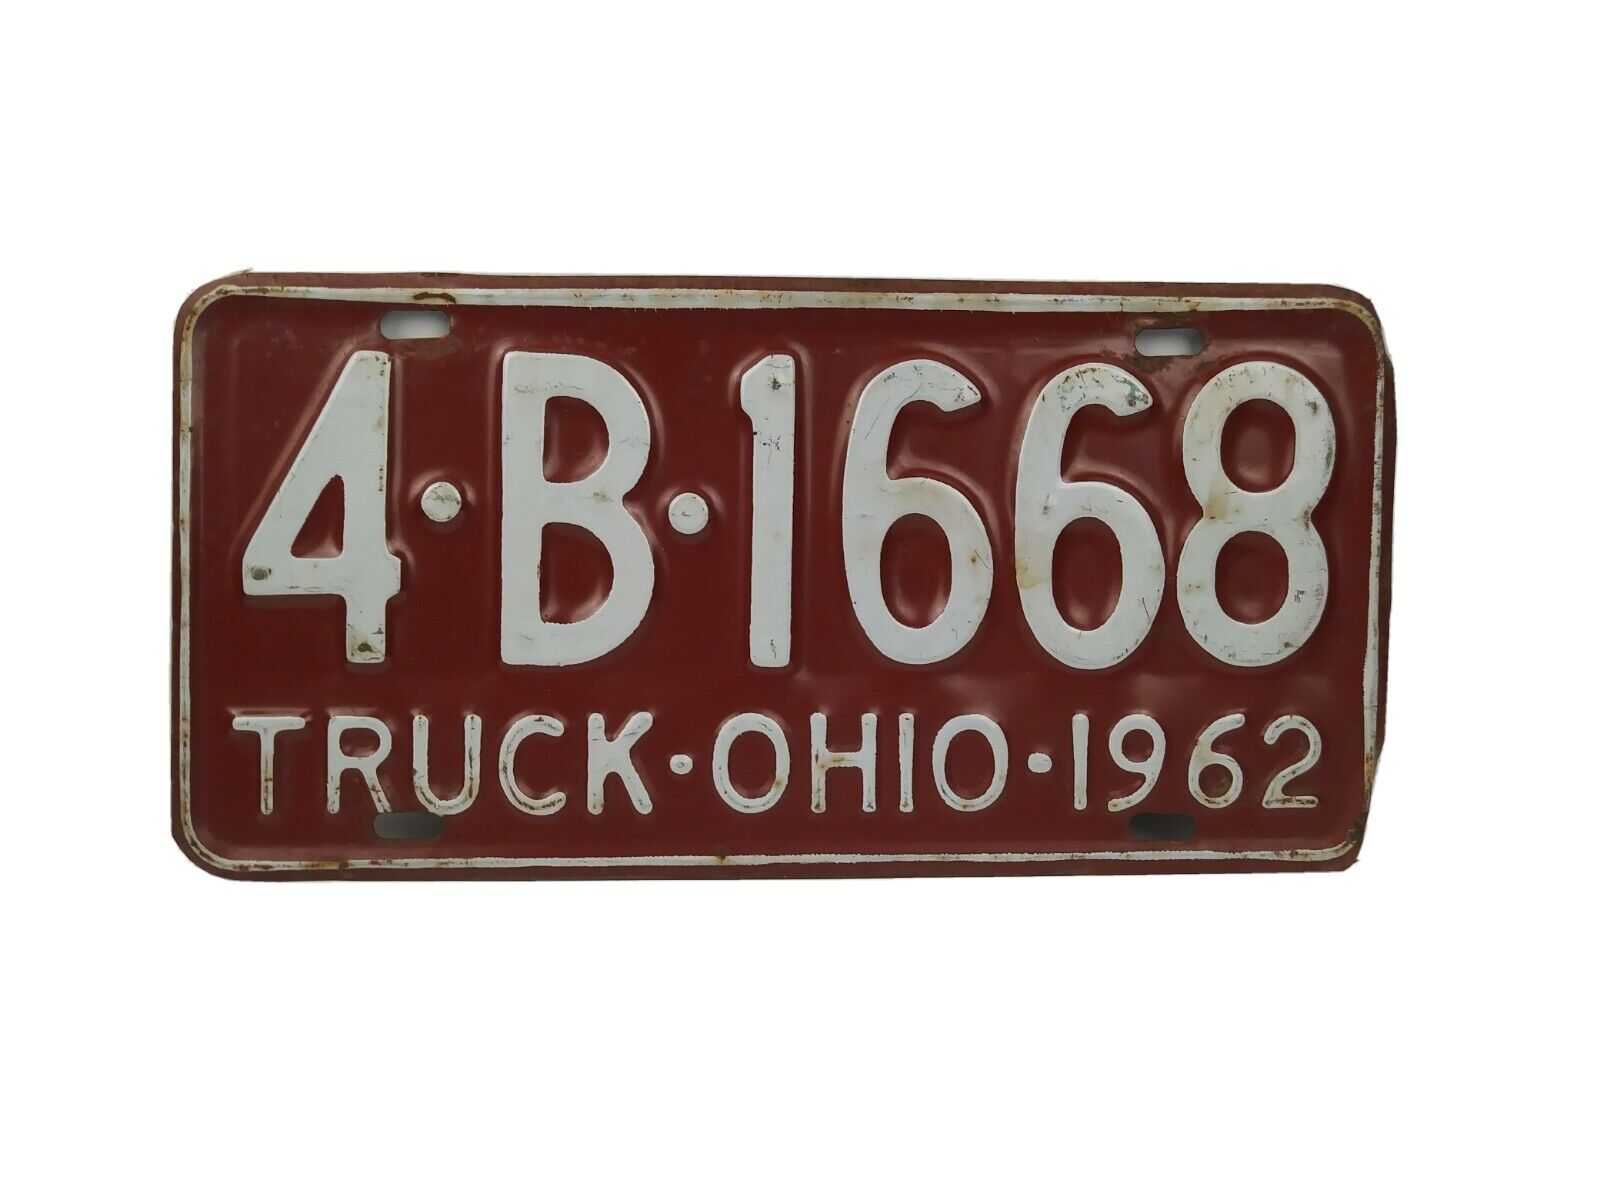 Ohio 1962 Old Truck License Plate.    Very Nice